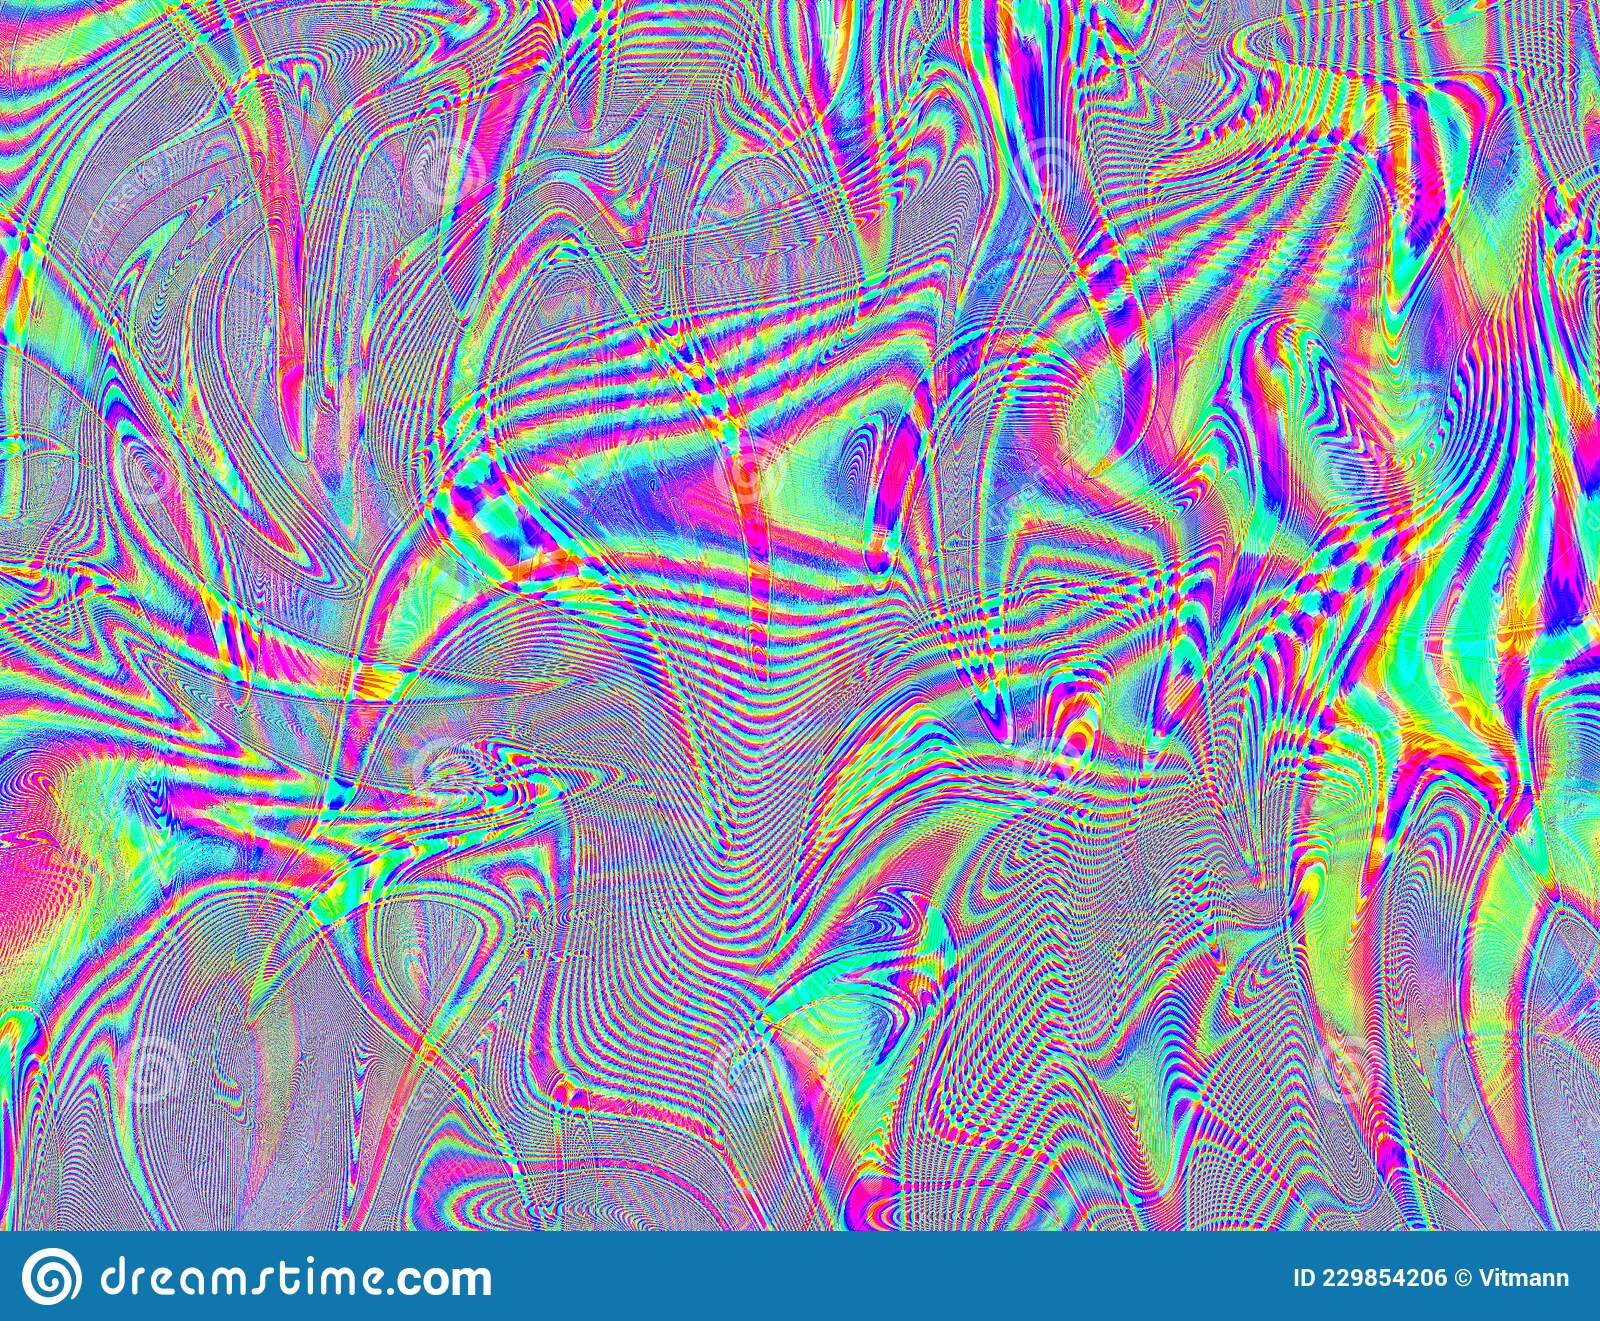 Hippie trippy psychedelic rainbow background lsd colorful wallpaper abstract hypnotic illusion stock photo